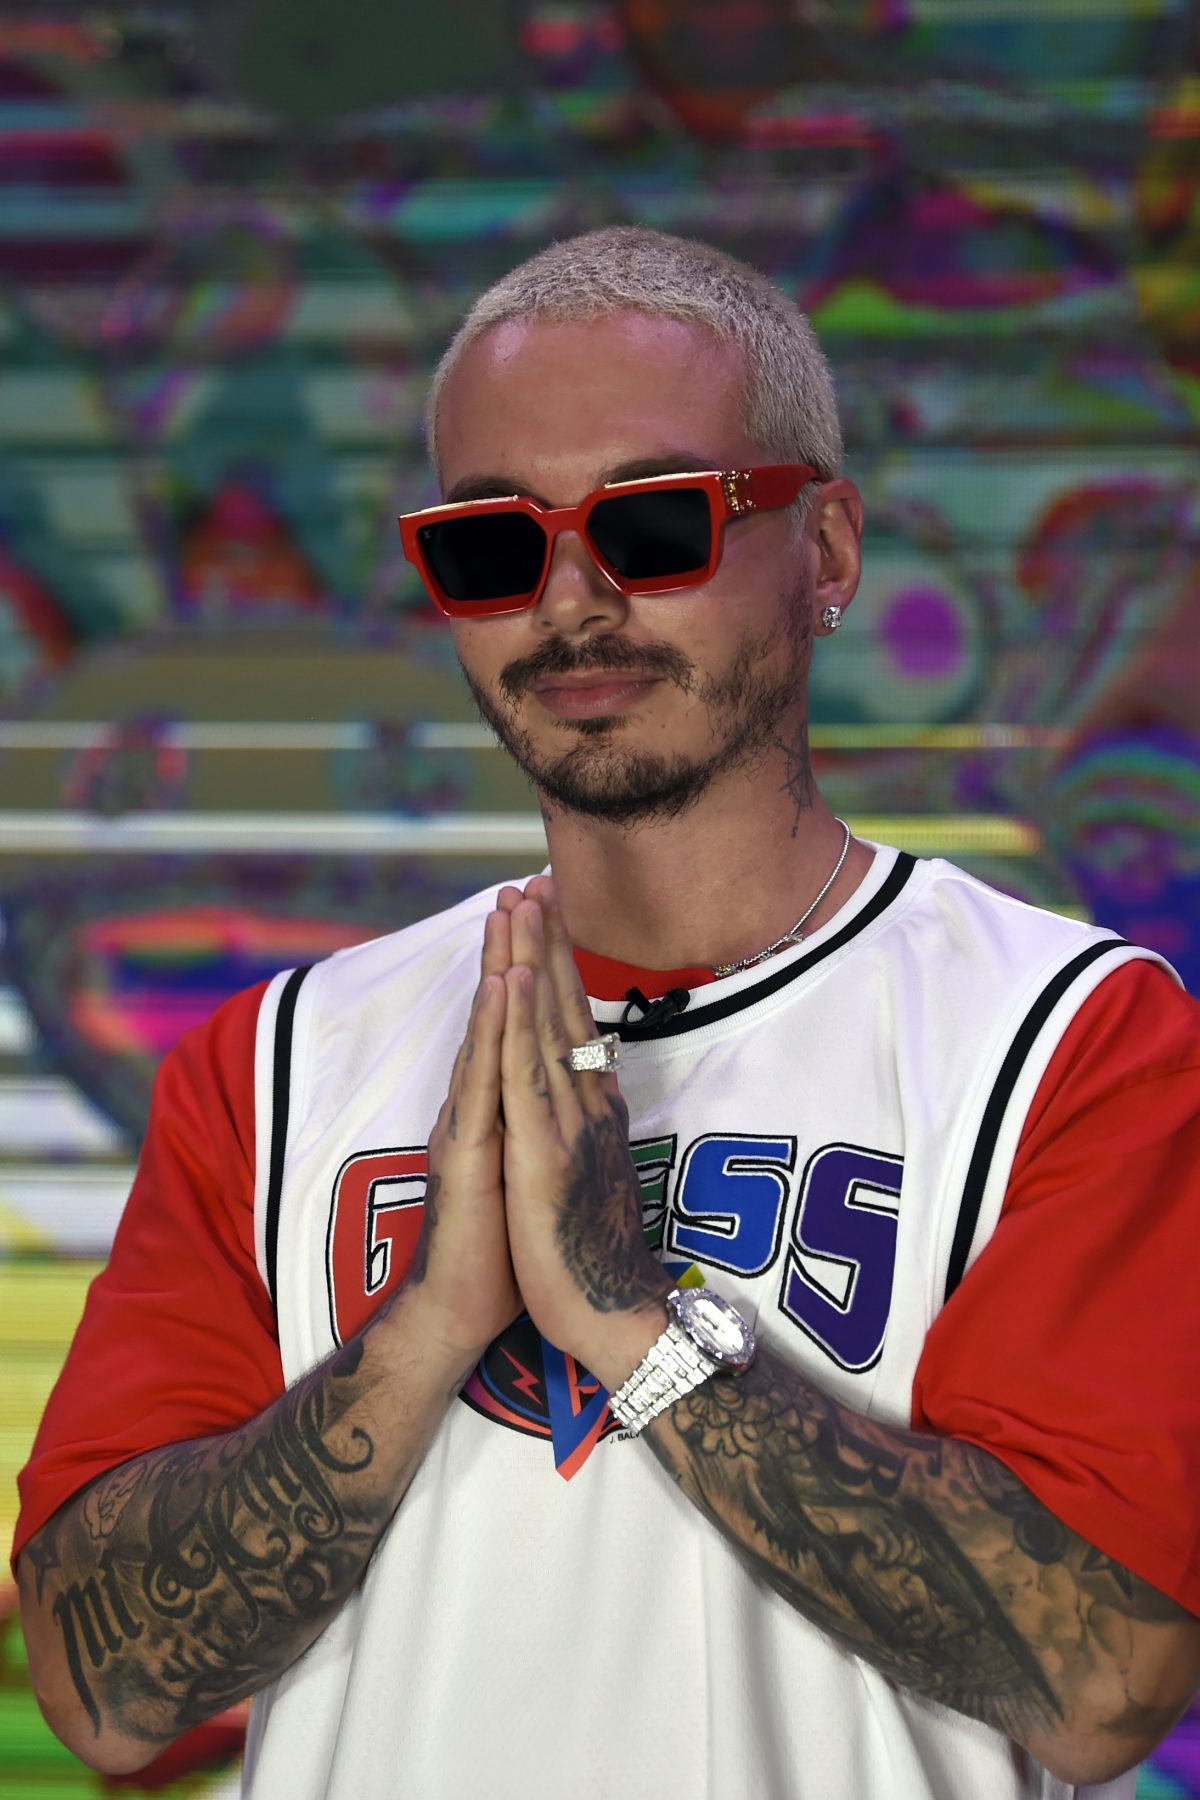 Colombian musician and composer Jose Alvaro Osorio Balvi aka J Balvin poses during a photo call at the Universal Music offices in Mexico City on March 3, 2020